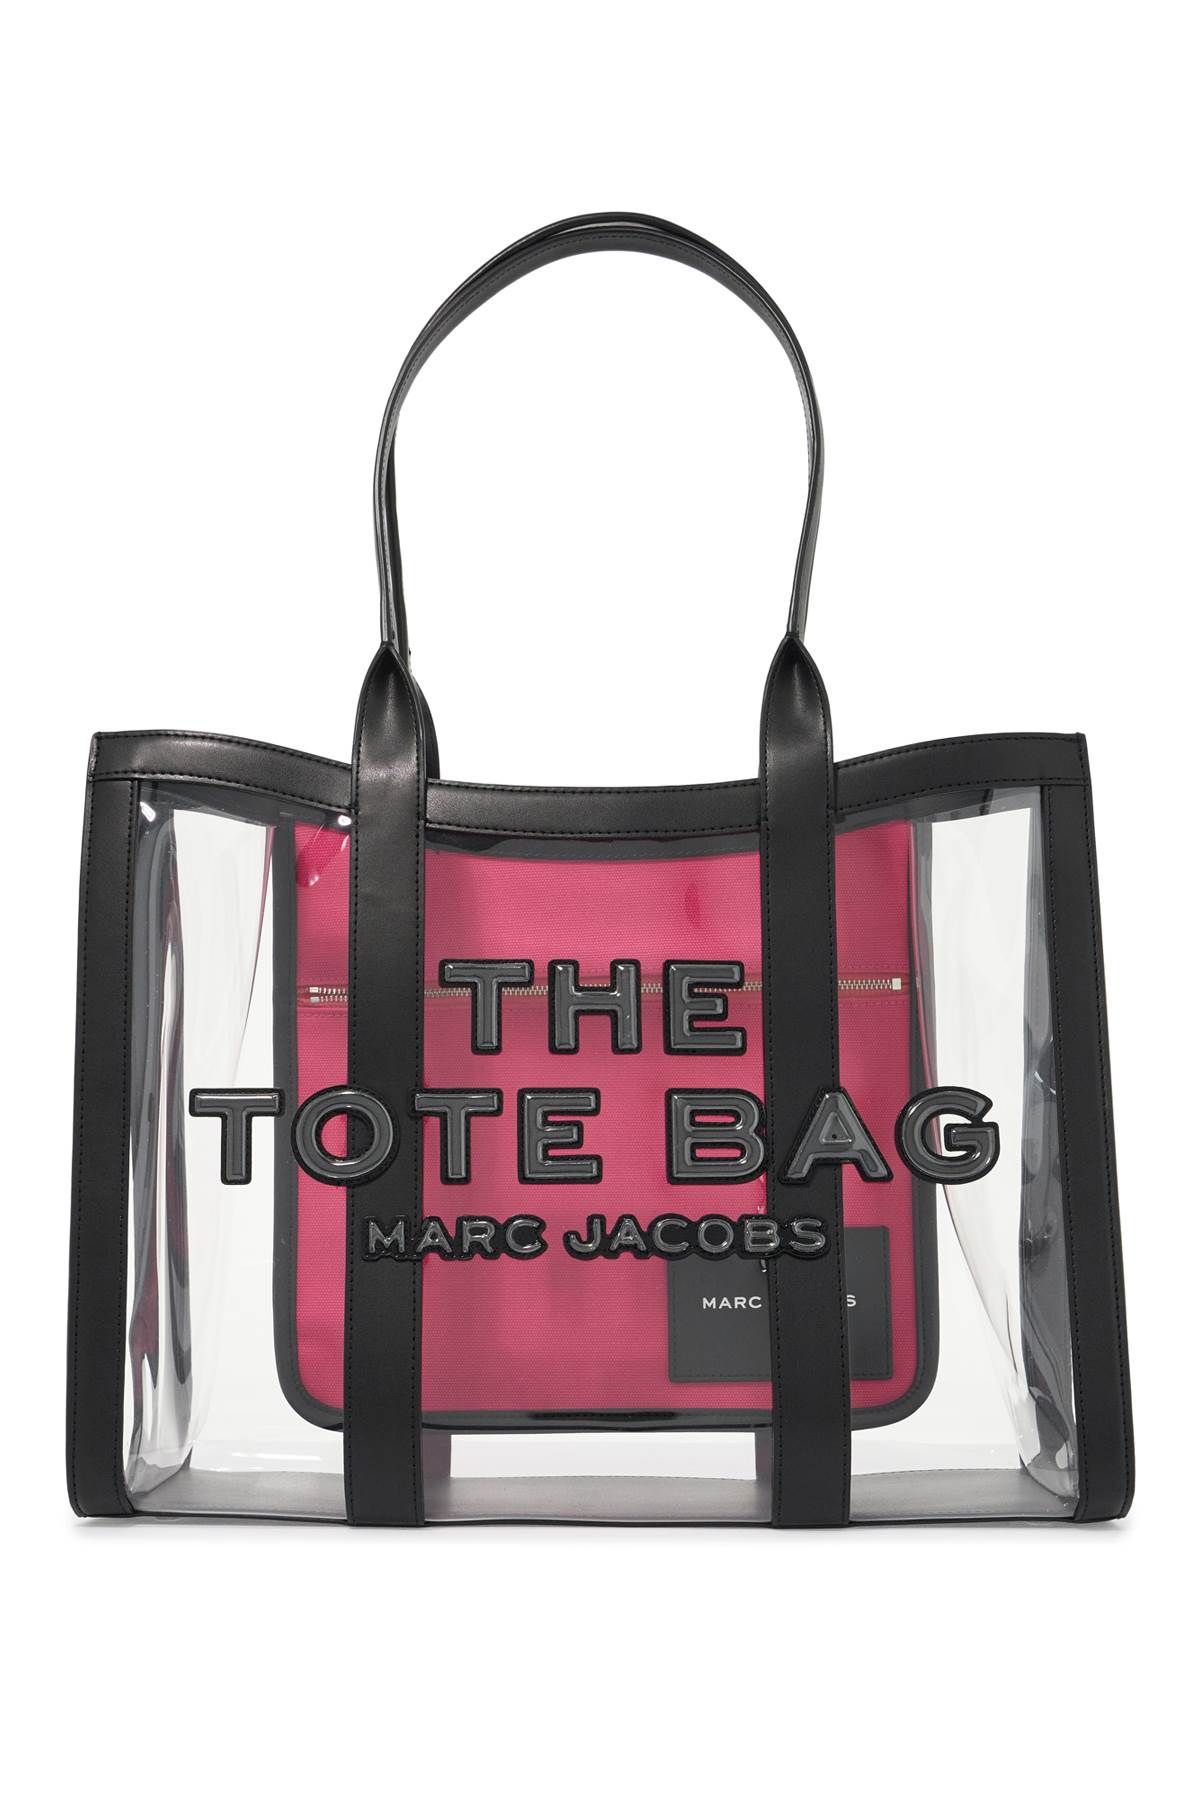 Marc Jacobs MARC JACOBS the clear large tote bag - b